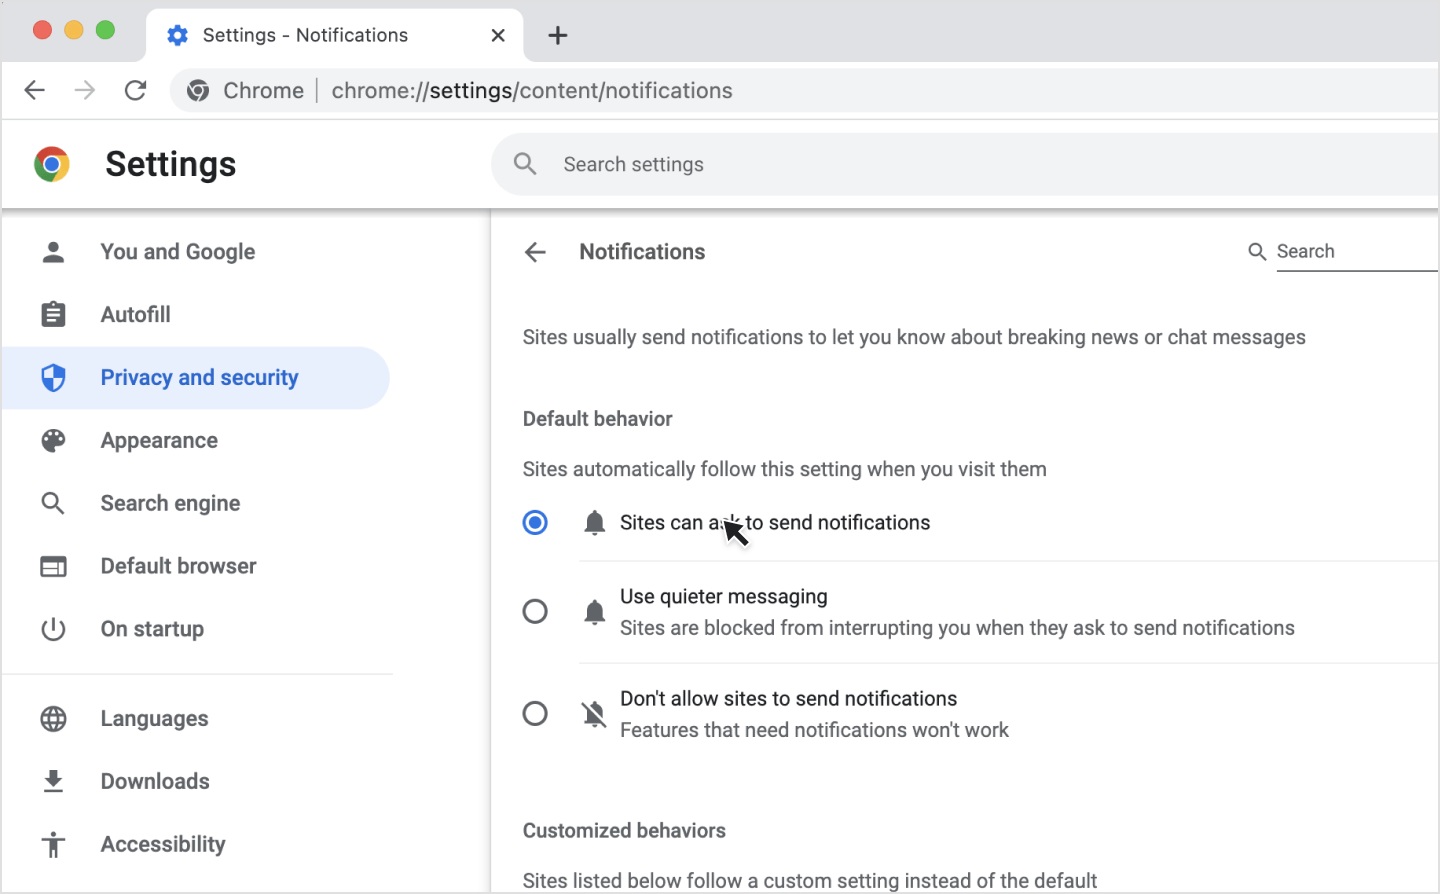 Image|Showing how to turn on notifications in Chrome